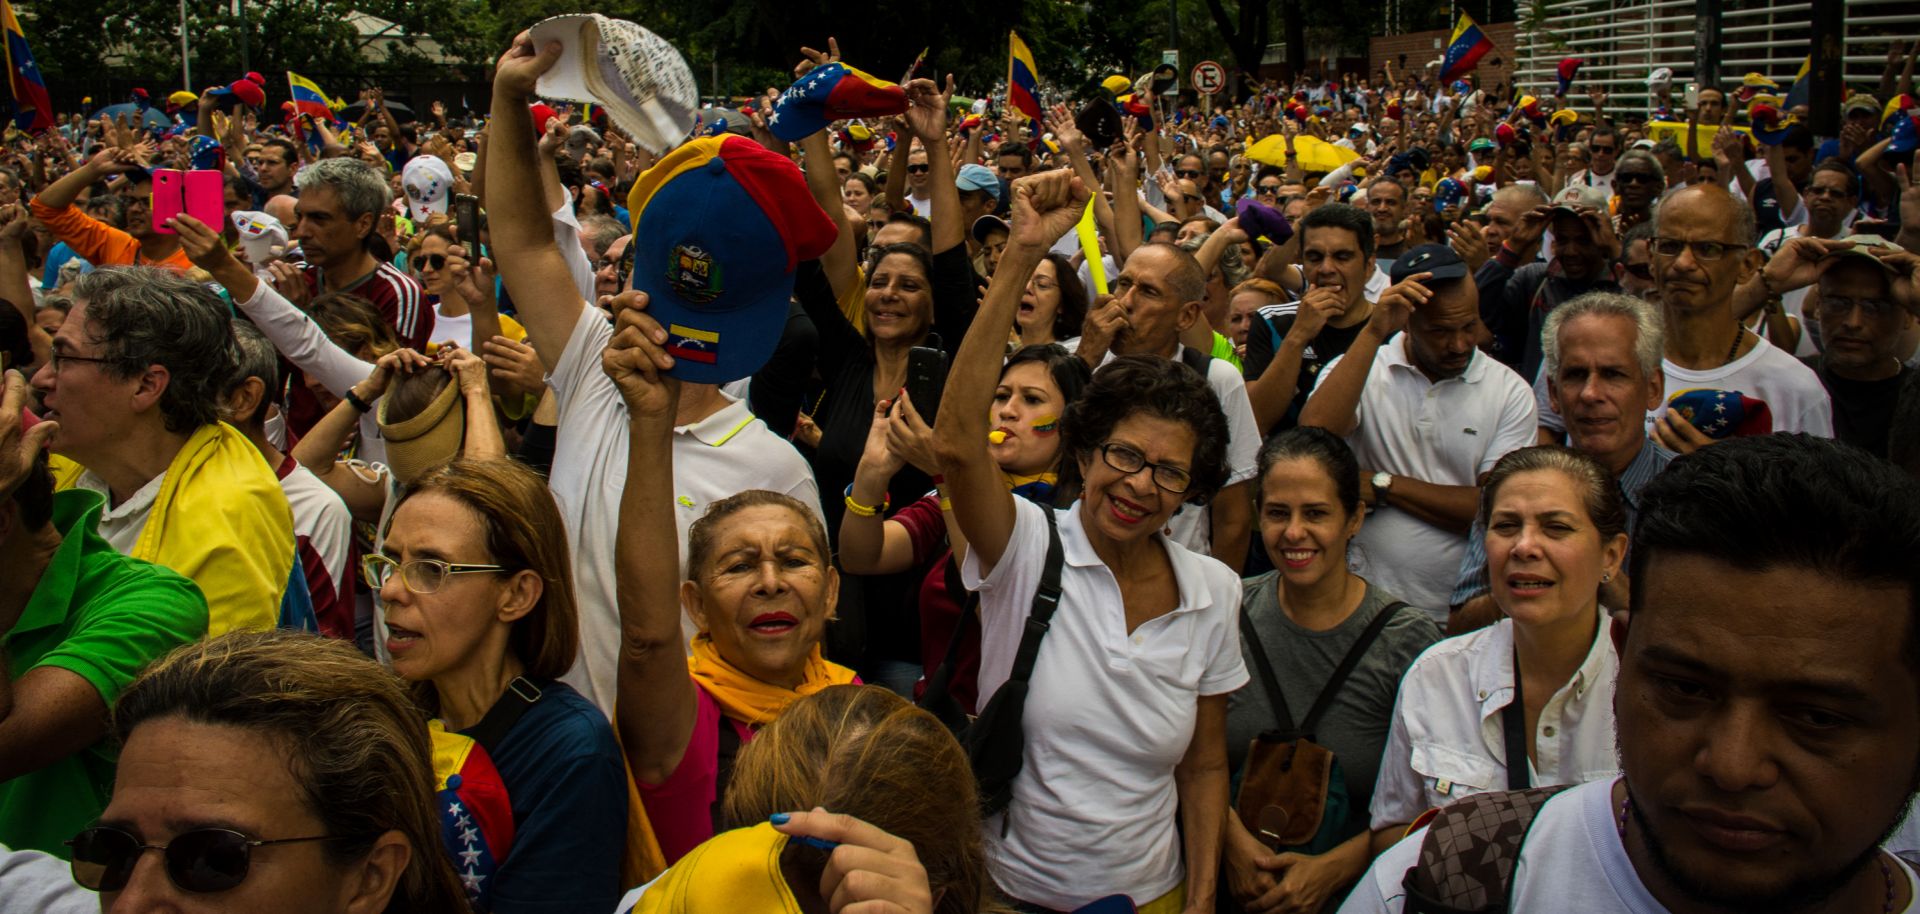 Numerous people wearing caps in the colors of the Venezuelan flag take part in a protest against the government of President Nicolas Maduro on Venezuela's day of independence.